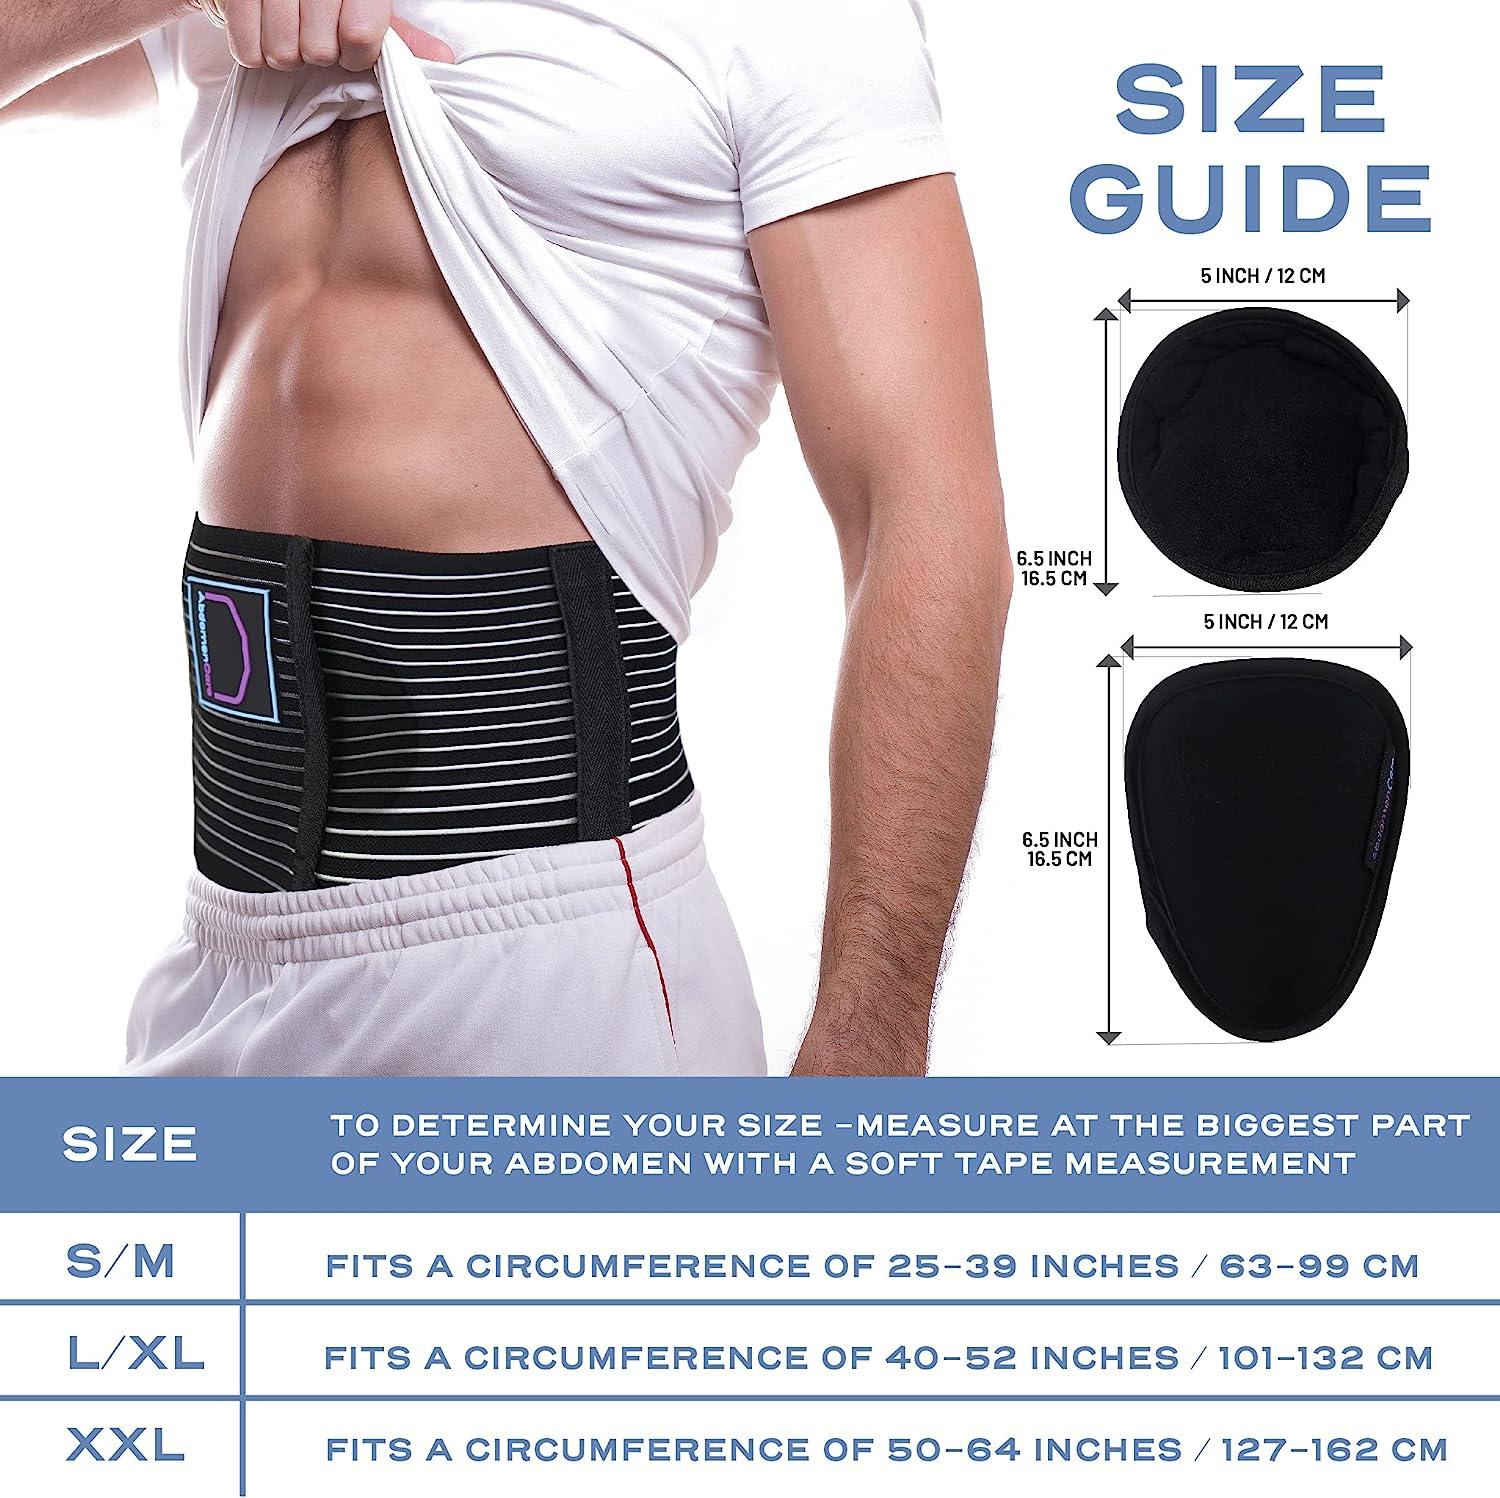 AbdomenCare Umbilical Hernia Belt, Abdominal Hernia Belt for Men & Women, Belly  Button Umbilical Hernia Binder w/ 2 Hernia Compression Pads, Ventral,  Epigastric & Post Surgery Support Belts